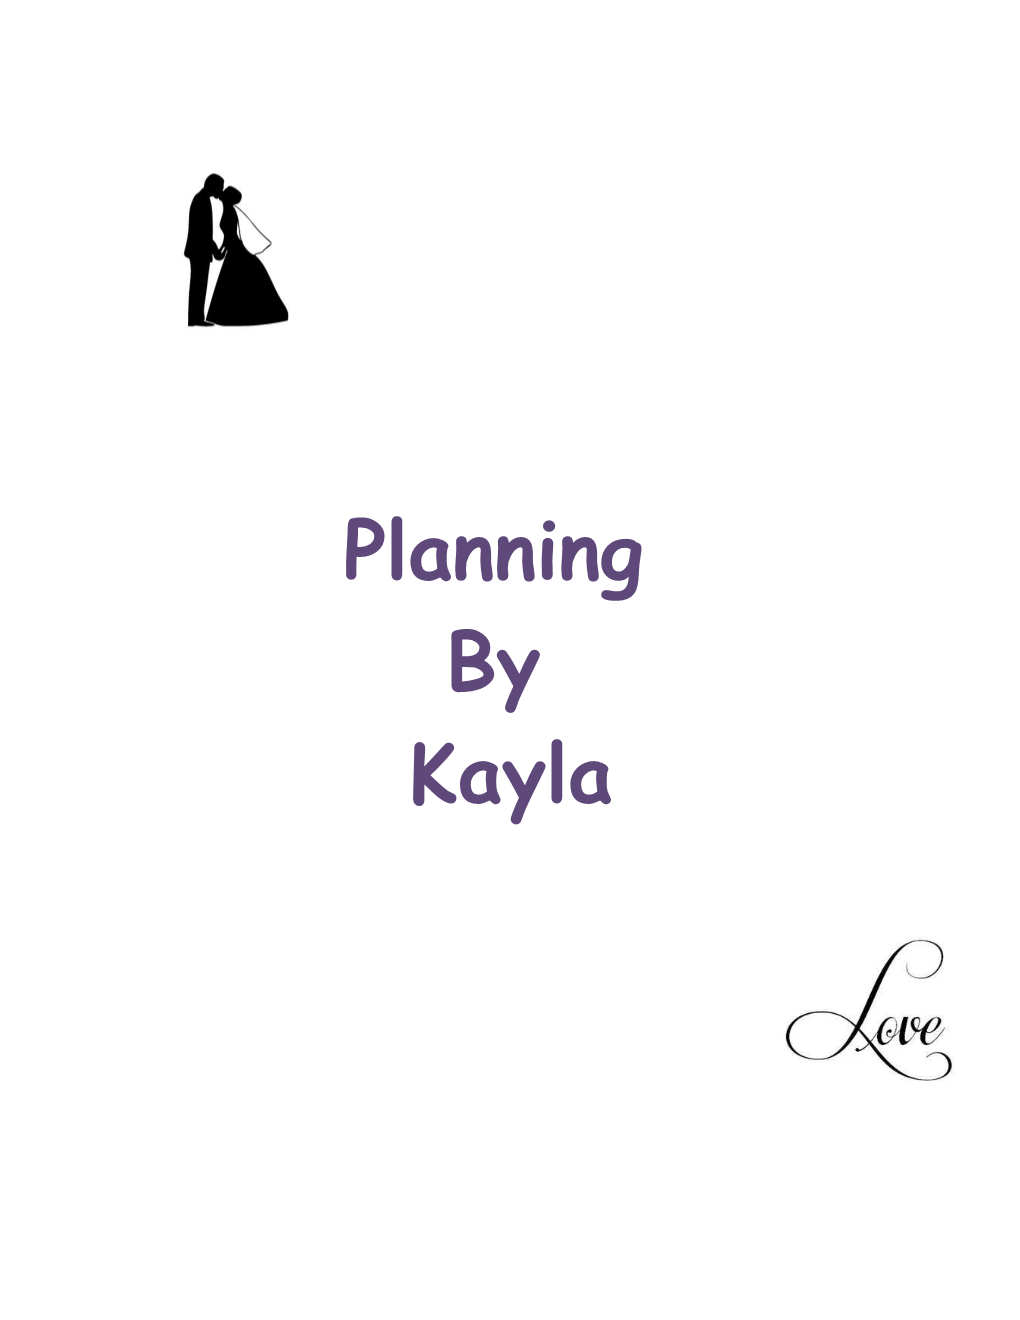 Established in 2015, Planning by Kayla Is a New Company Run by a Young Professional. This